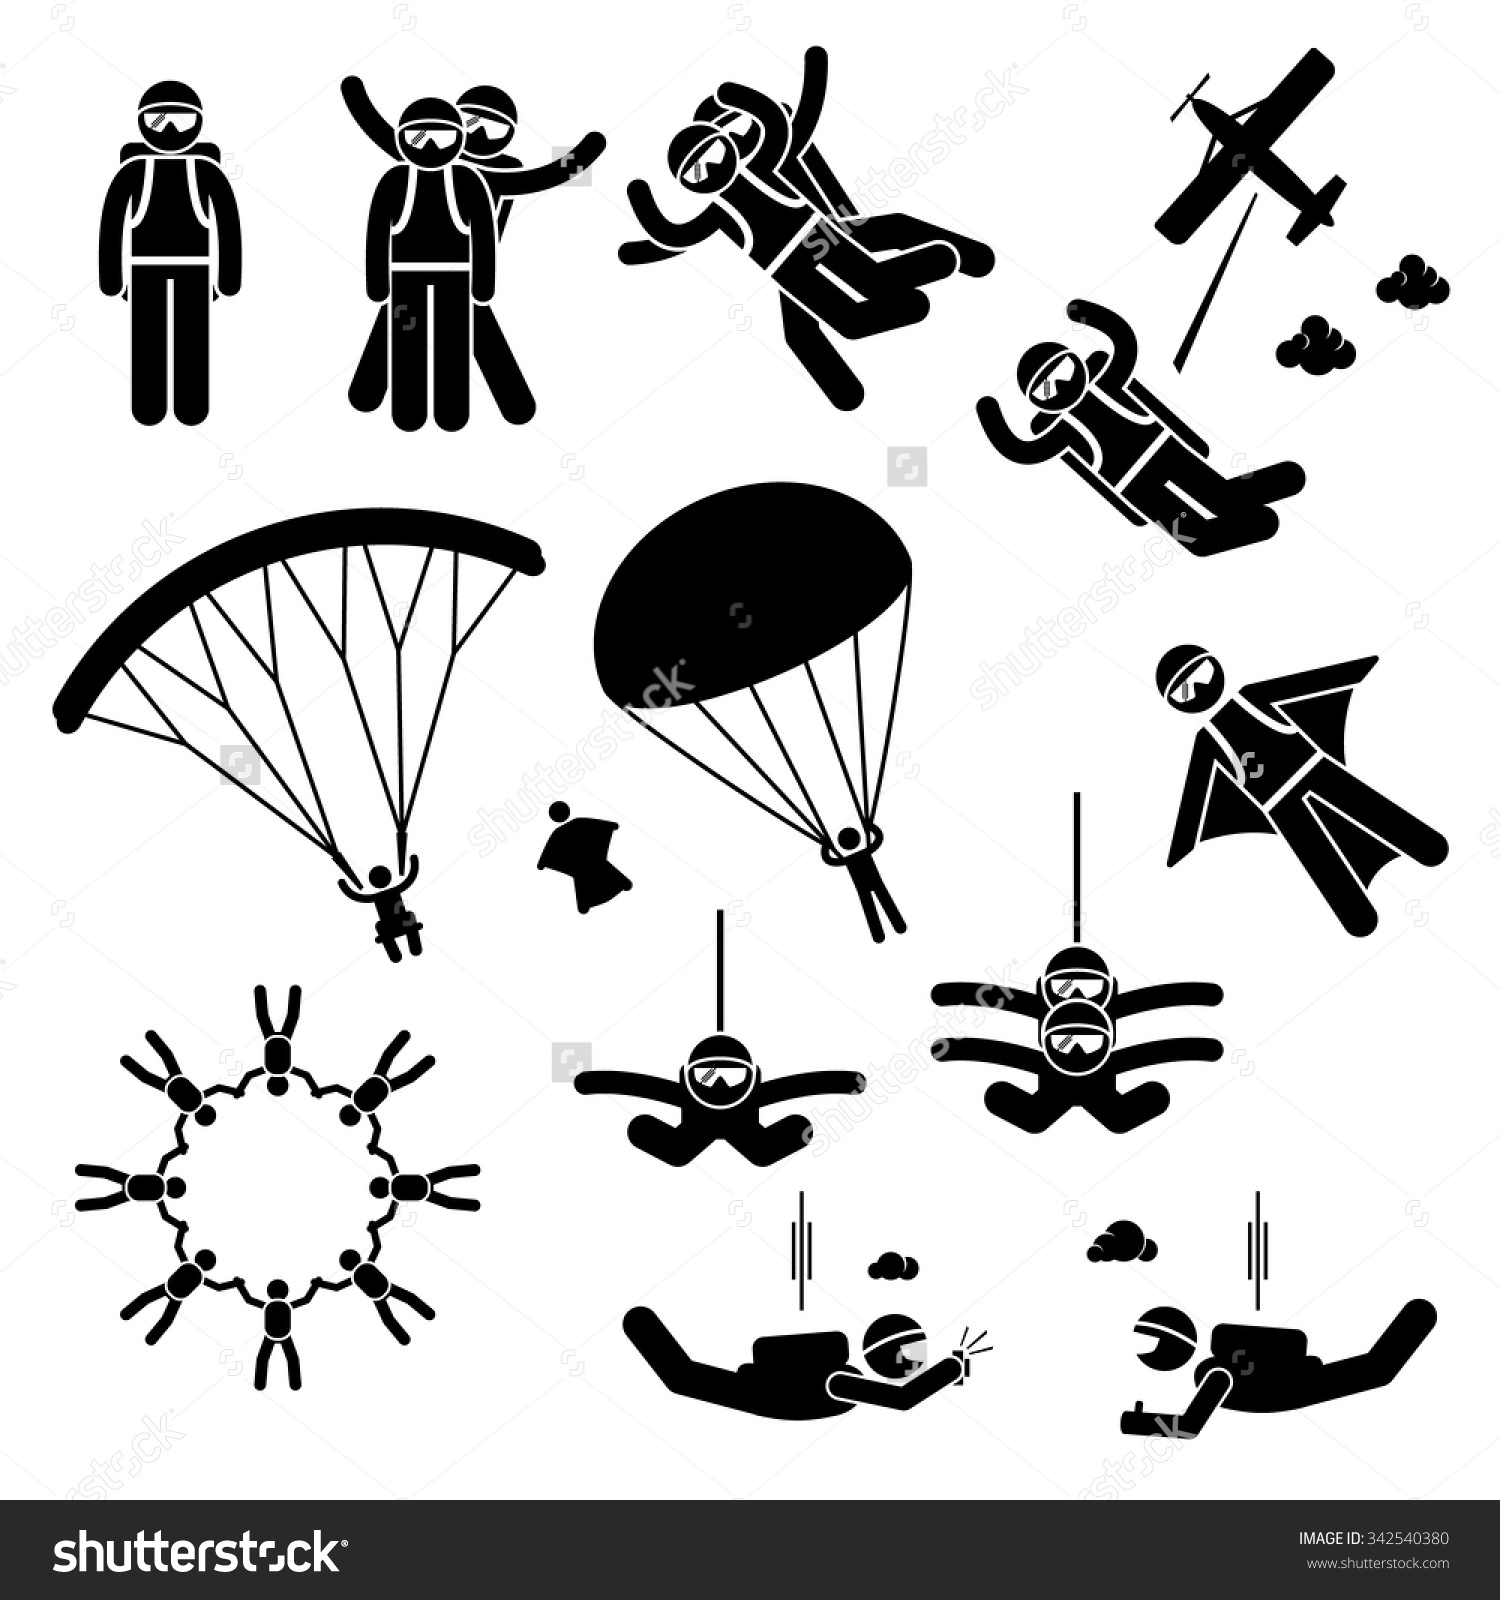 Skydiver On Parachute. Vector Icon Royalty Free Cliparts, Vectors 